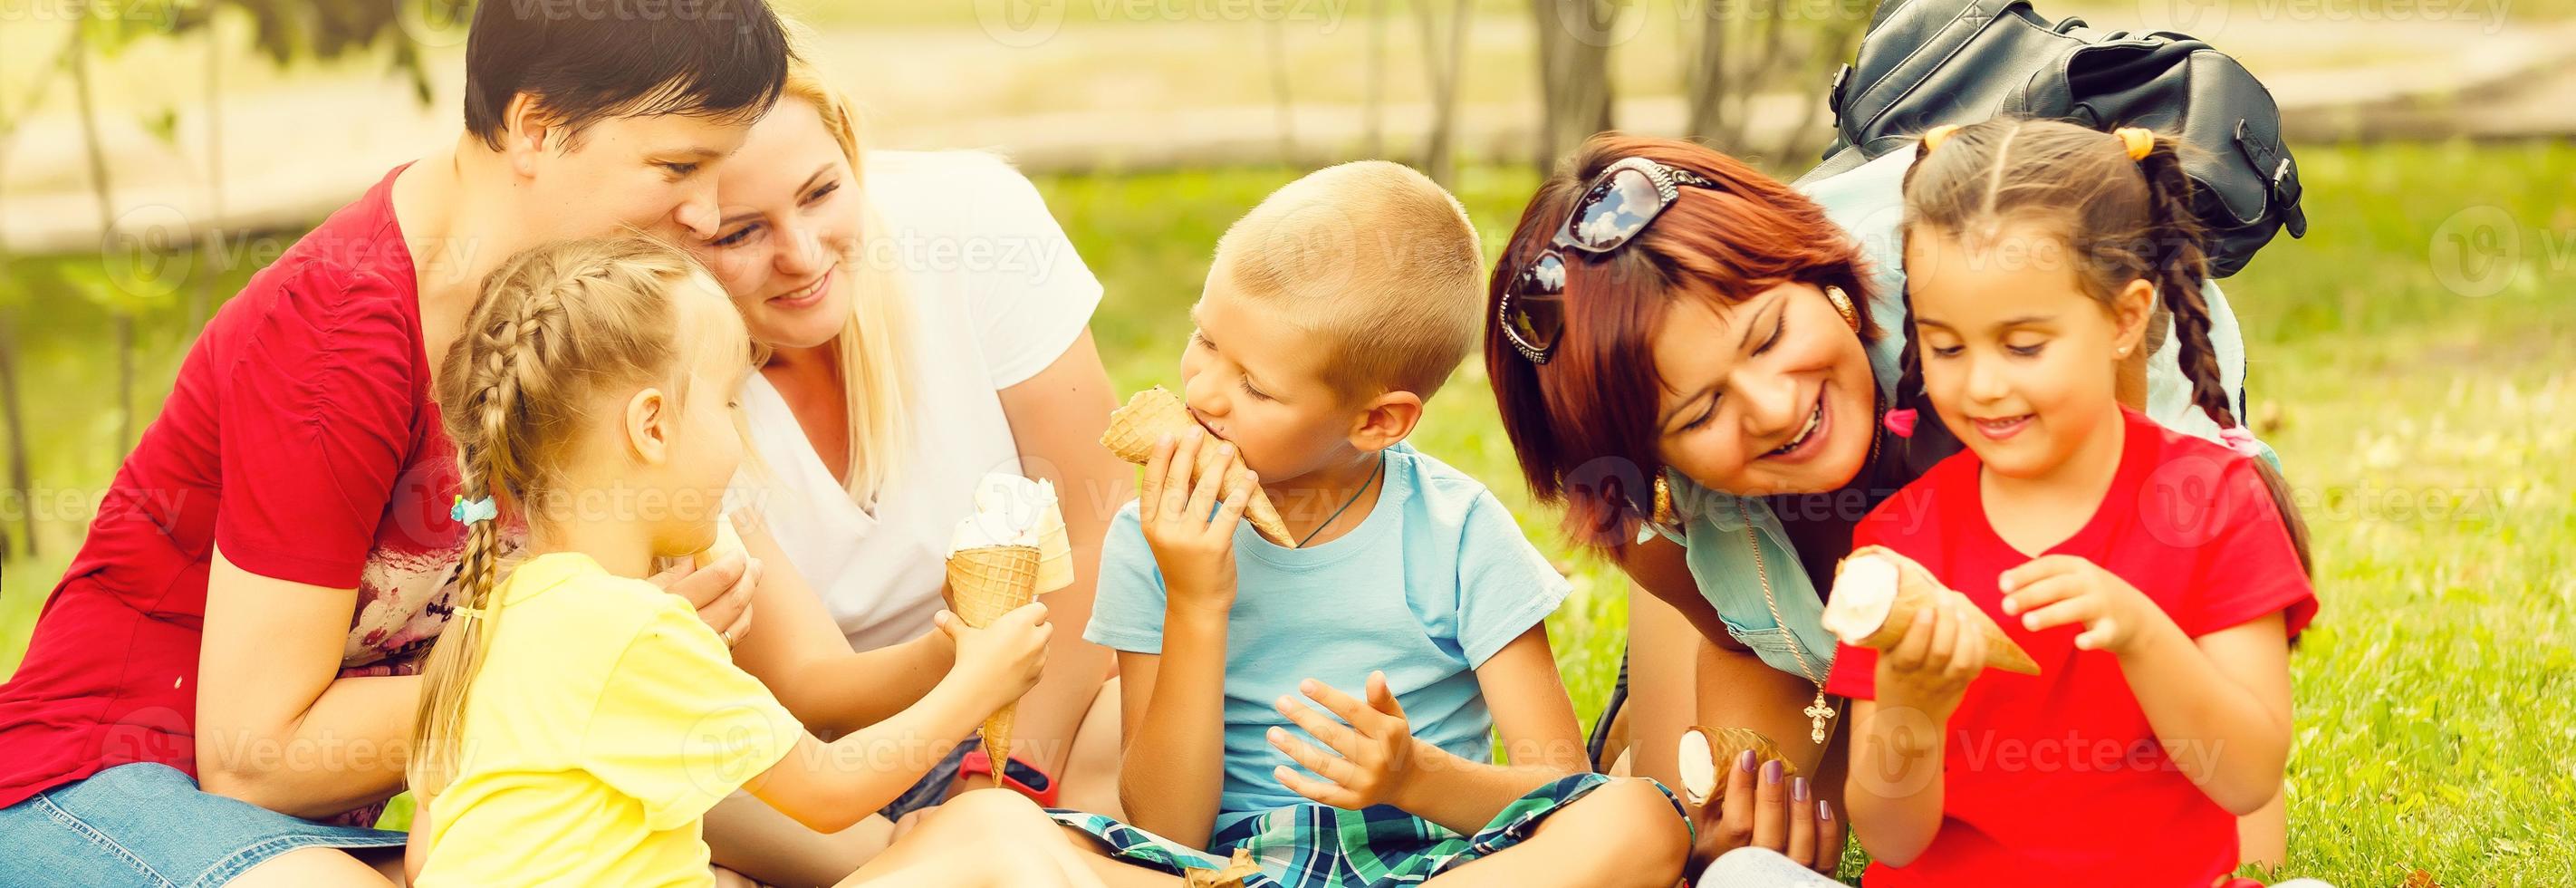 Family with kids eating ice-cream. Outdoor. photo